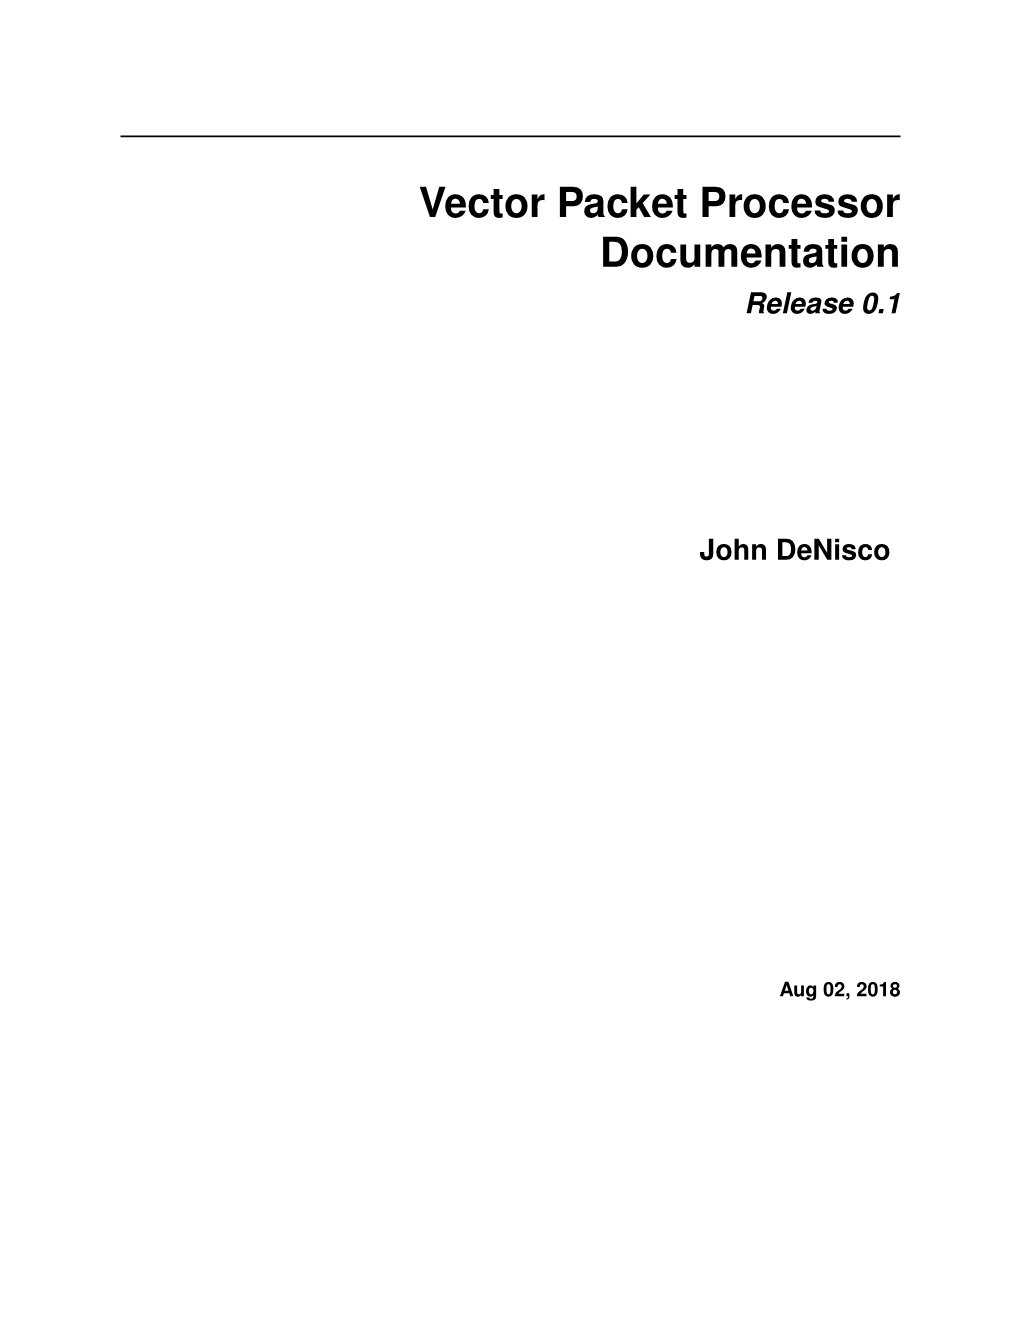 Vector Packet Processor Documentation Release 0.1